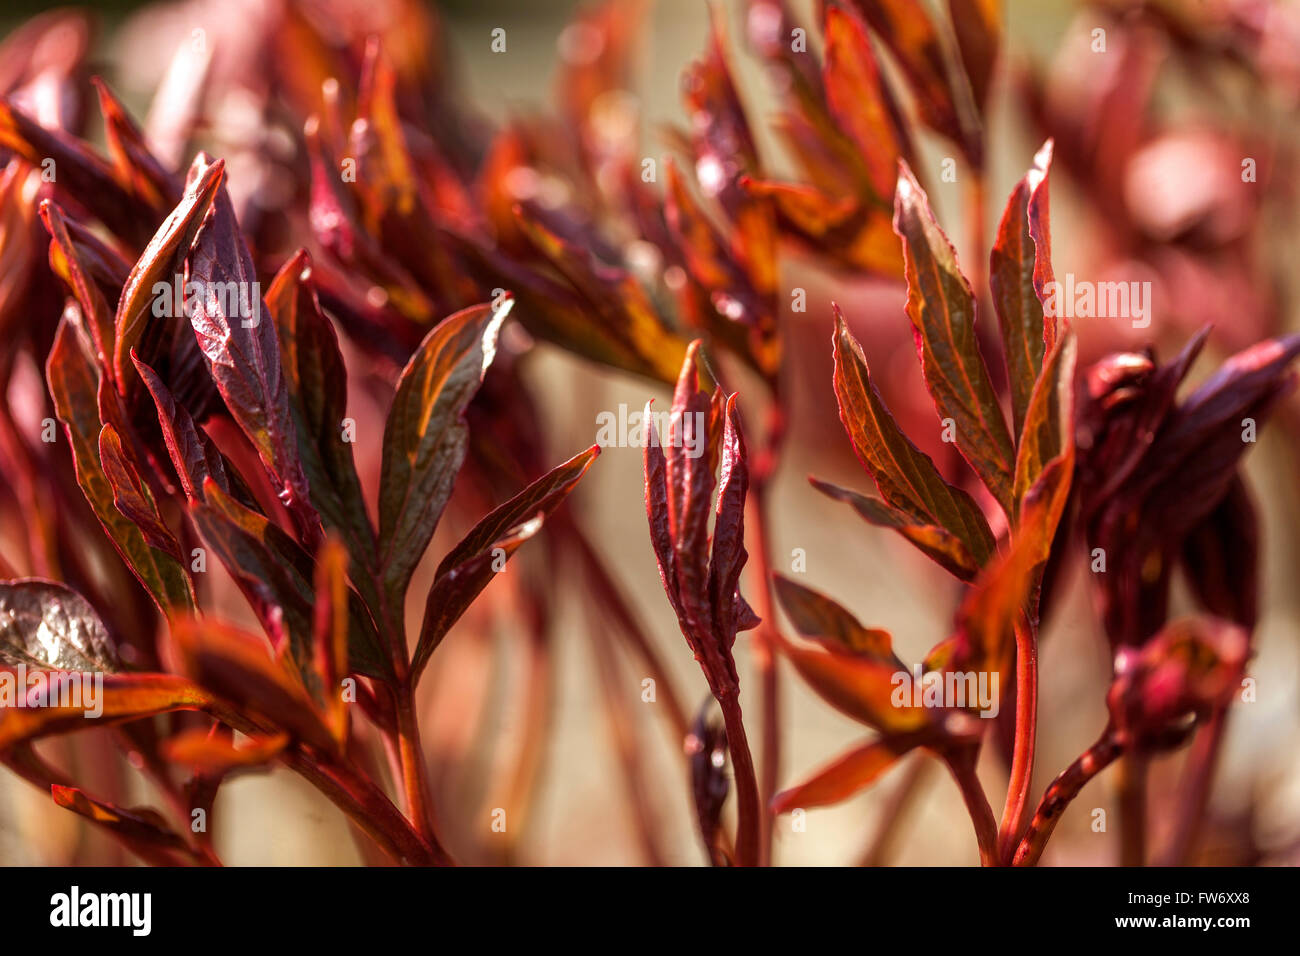 Bright red shoots of tree peonies Paeonia suffruticosa, new foliage budding in early spring Stock Photo